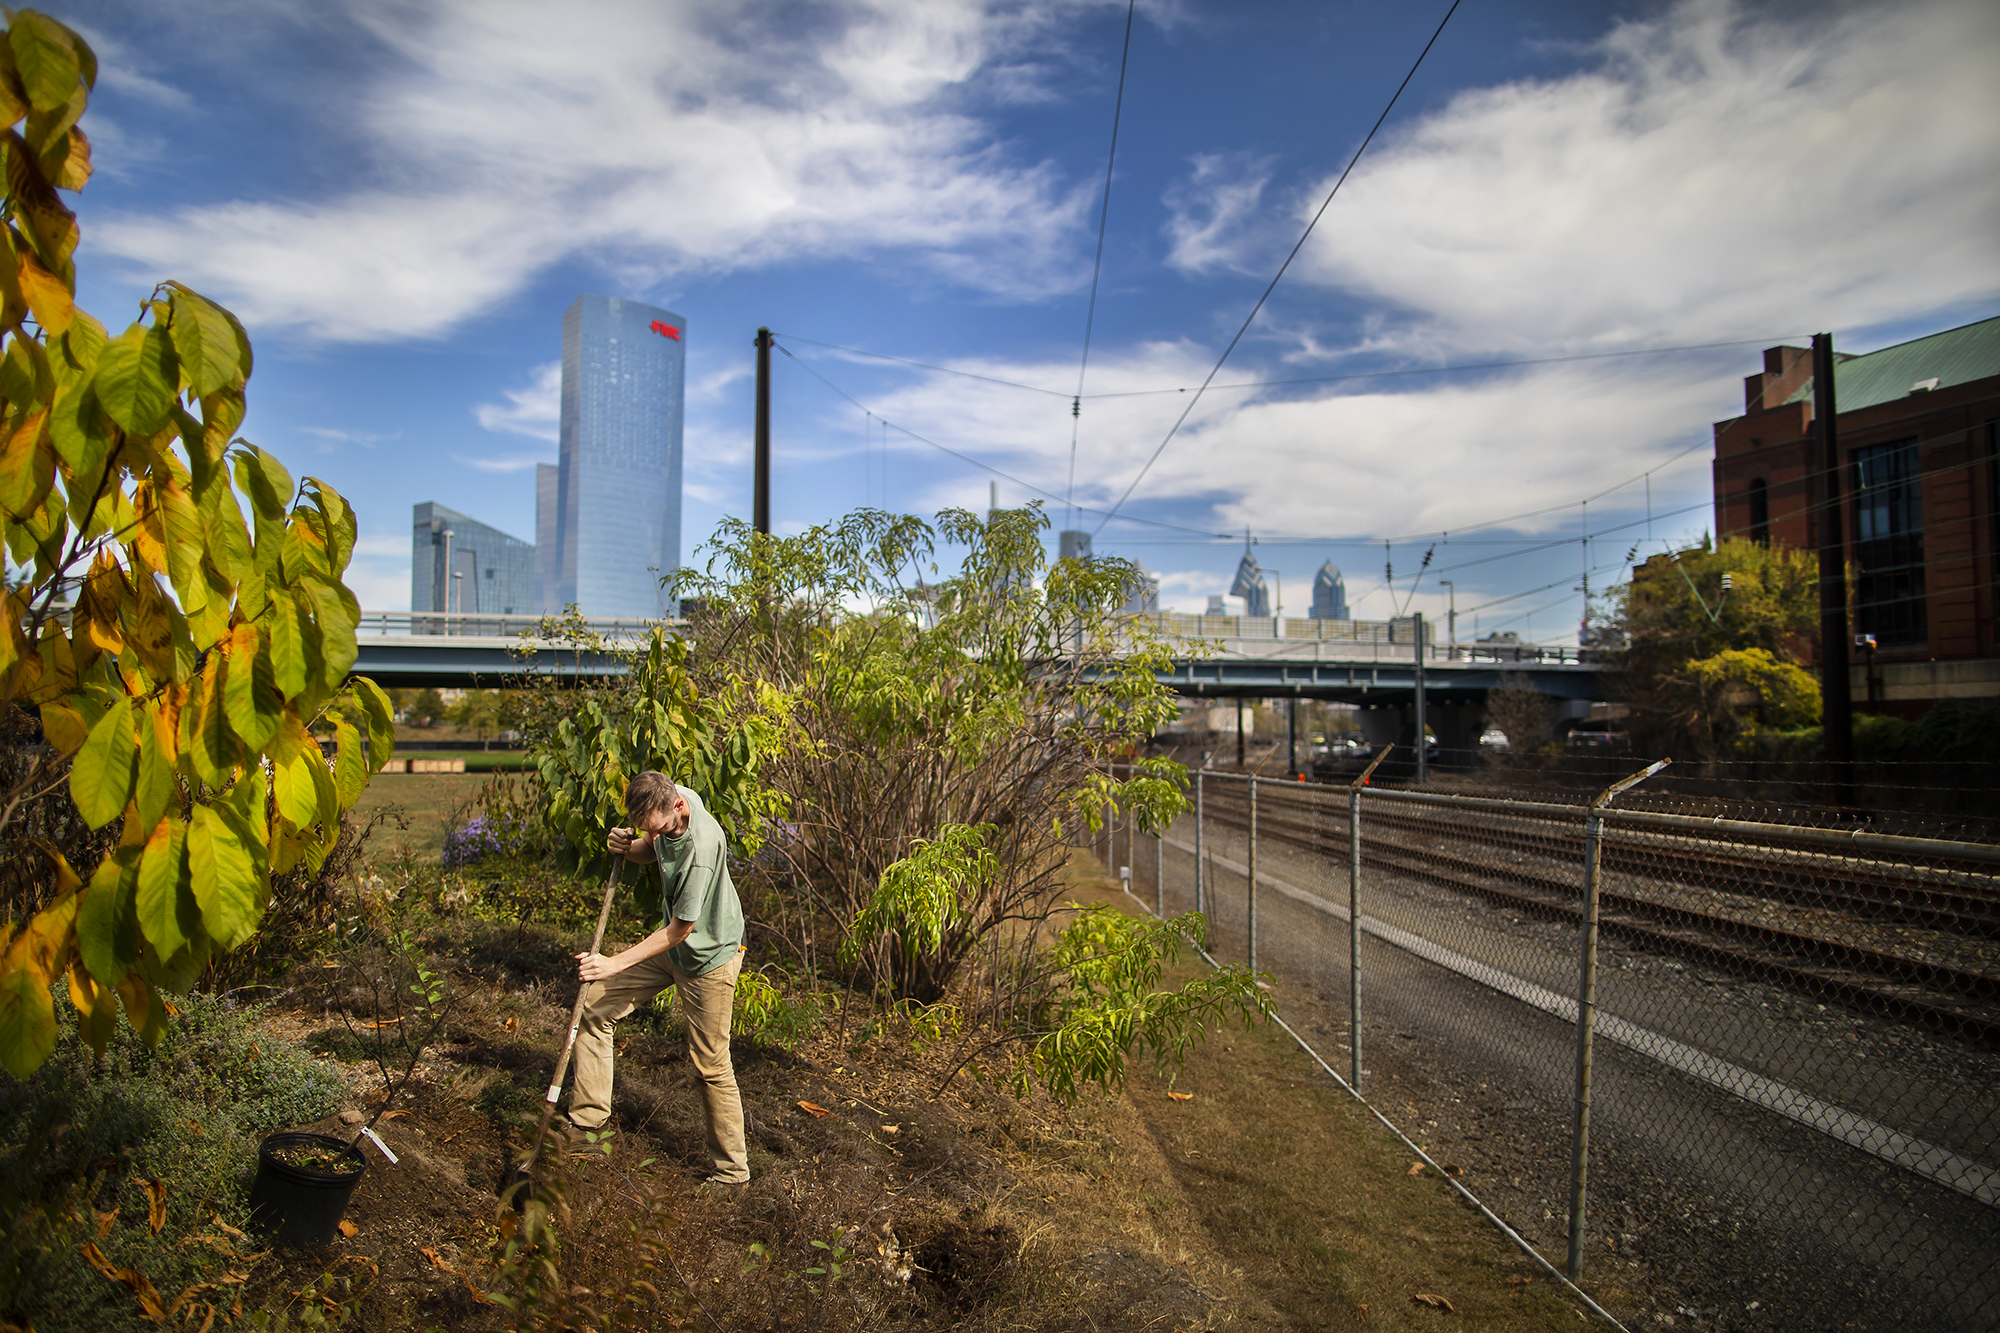 Person digs with shovel in garden bed next to railroad tracks, with the Philadelphia skyline in the background